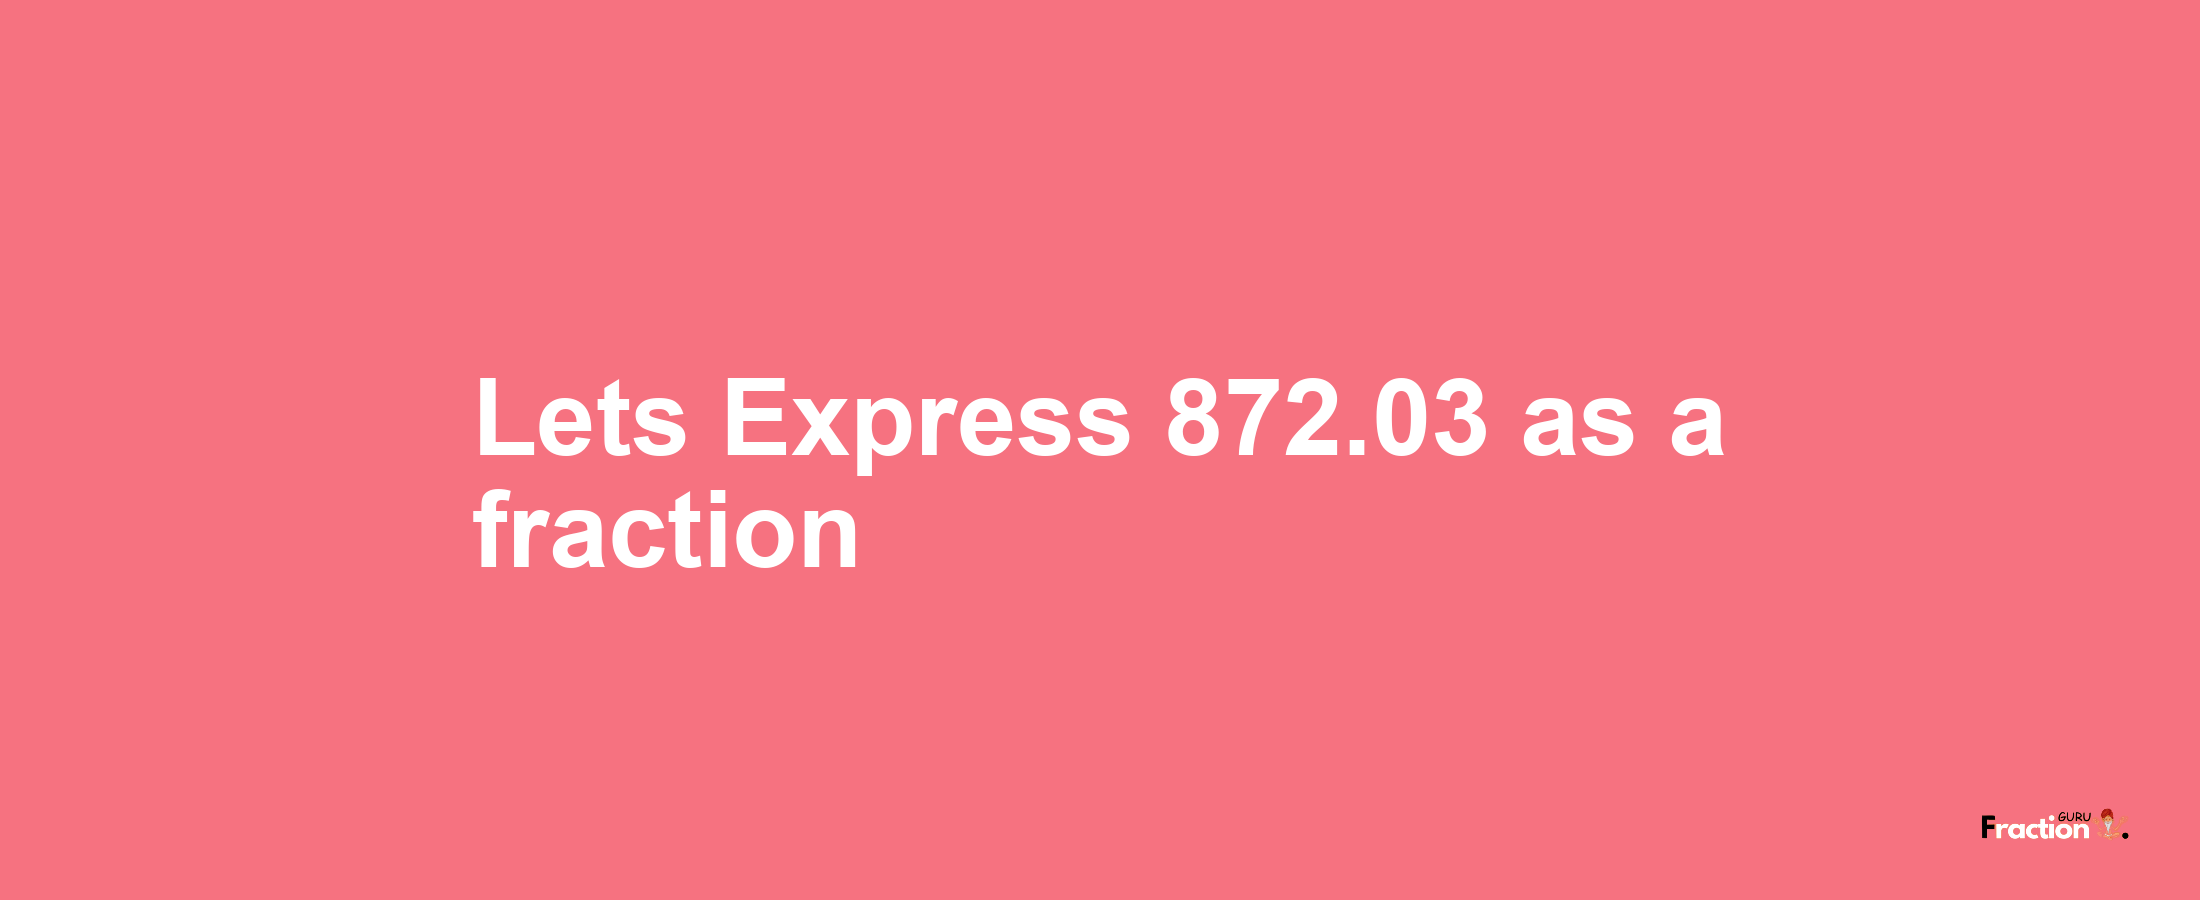 Lets Express 872.03 as afraction